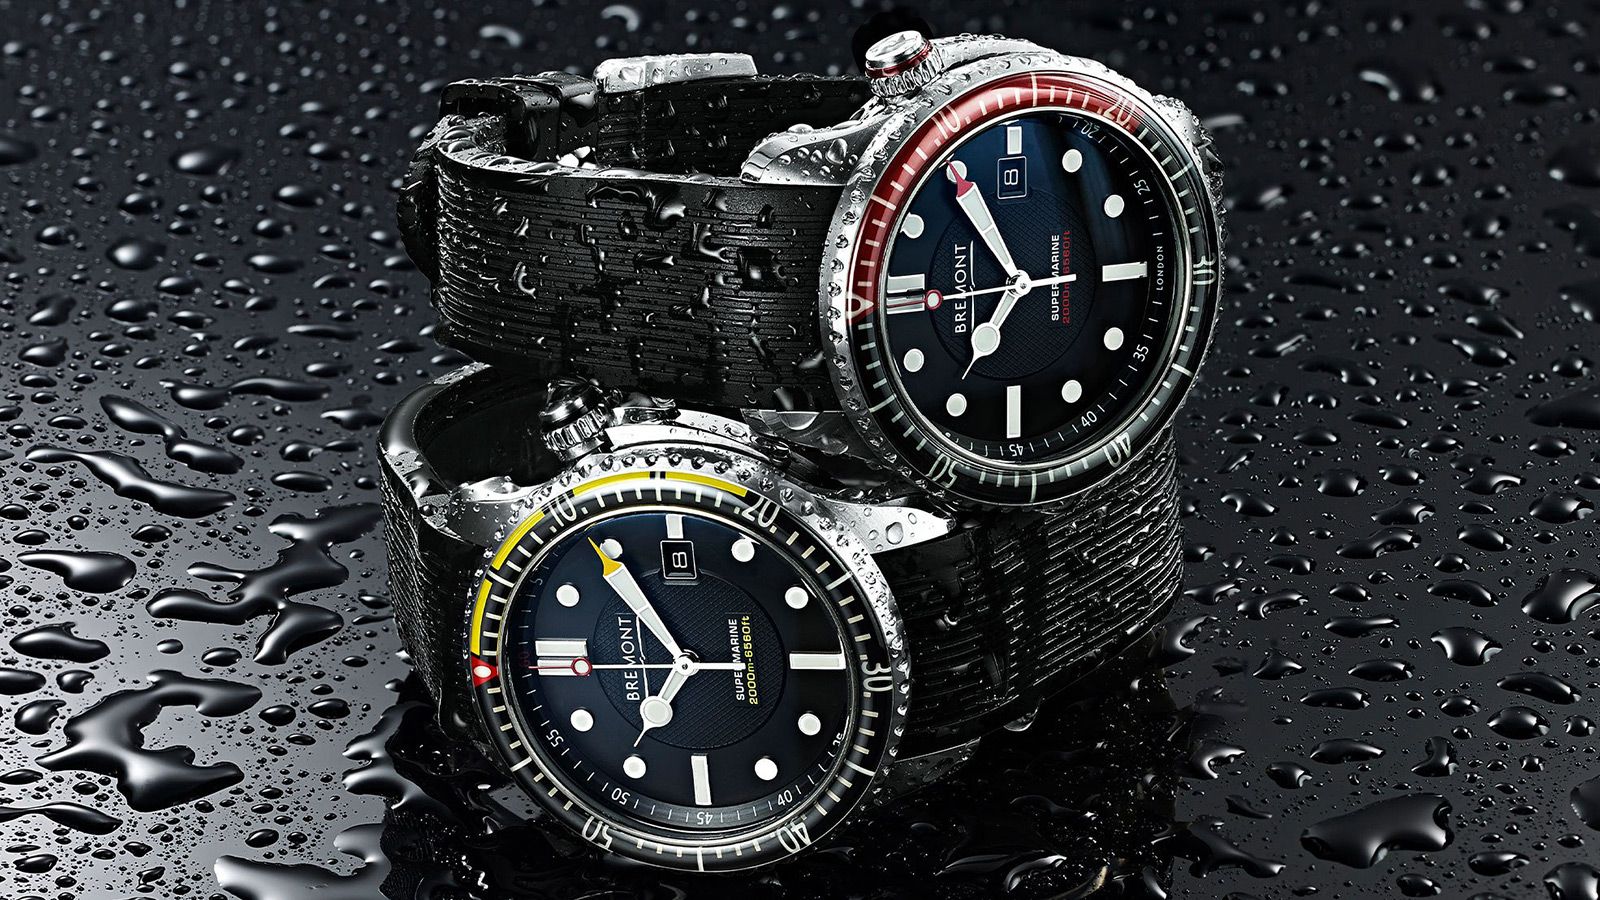 An Image Of The Bremont Supermarine S2000